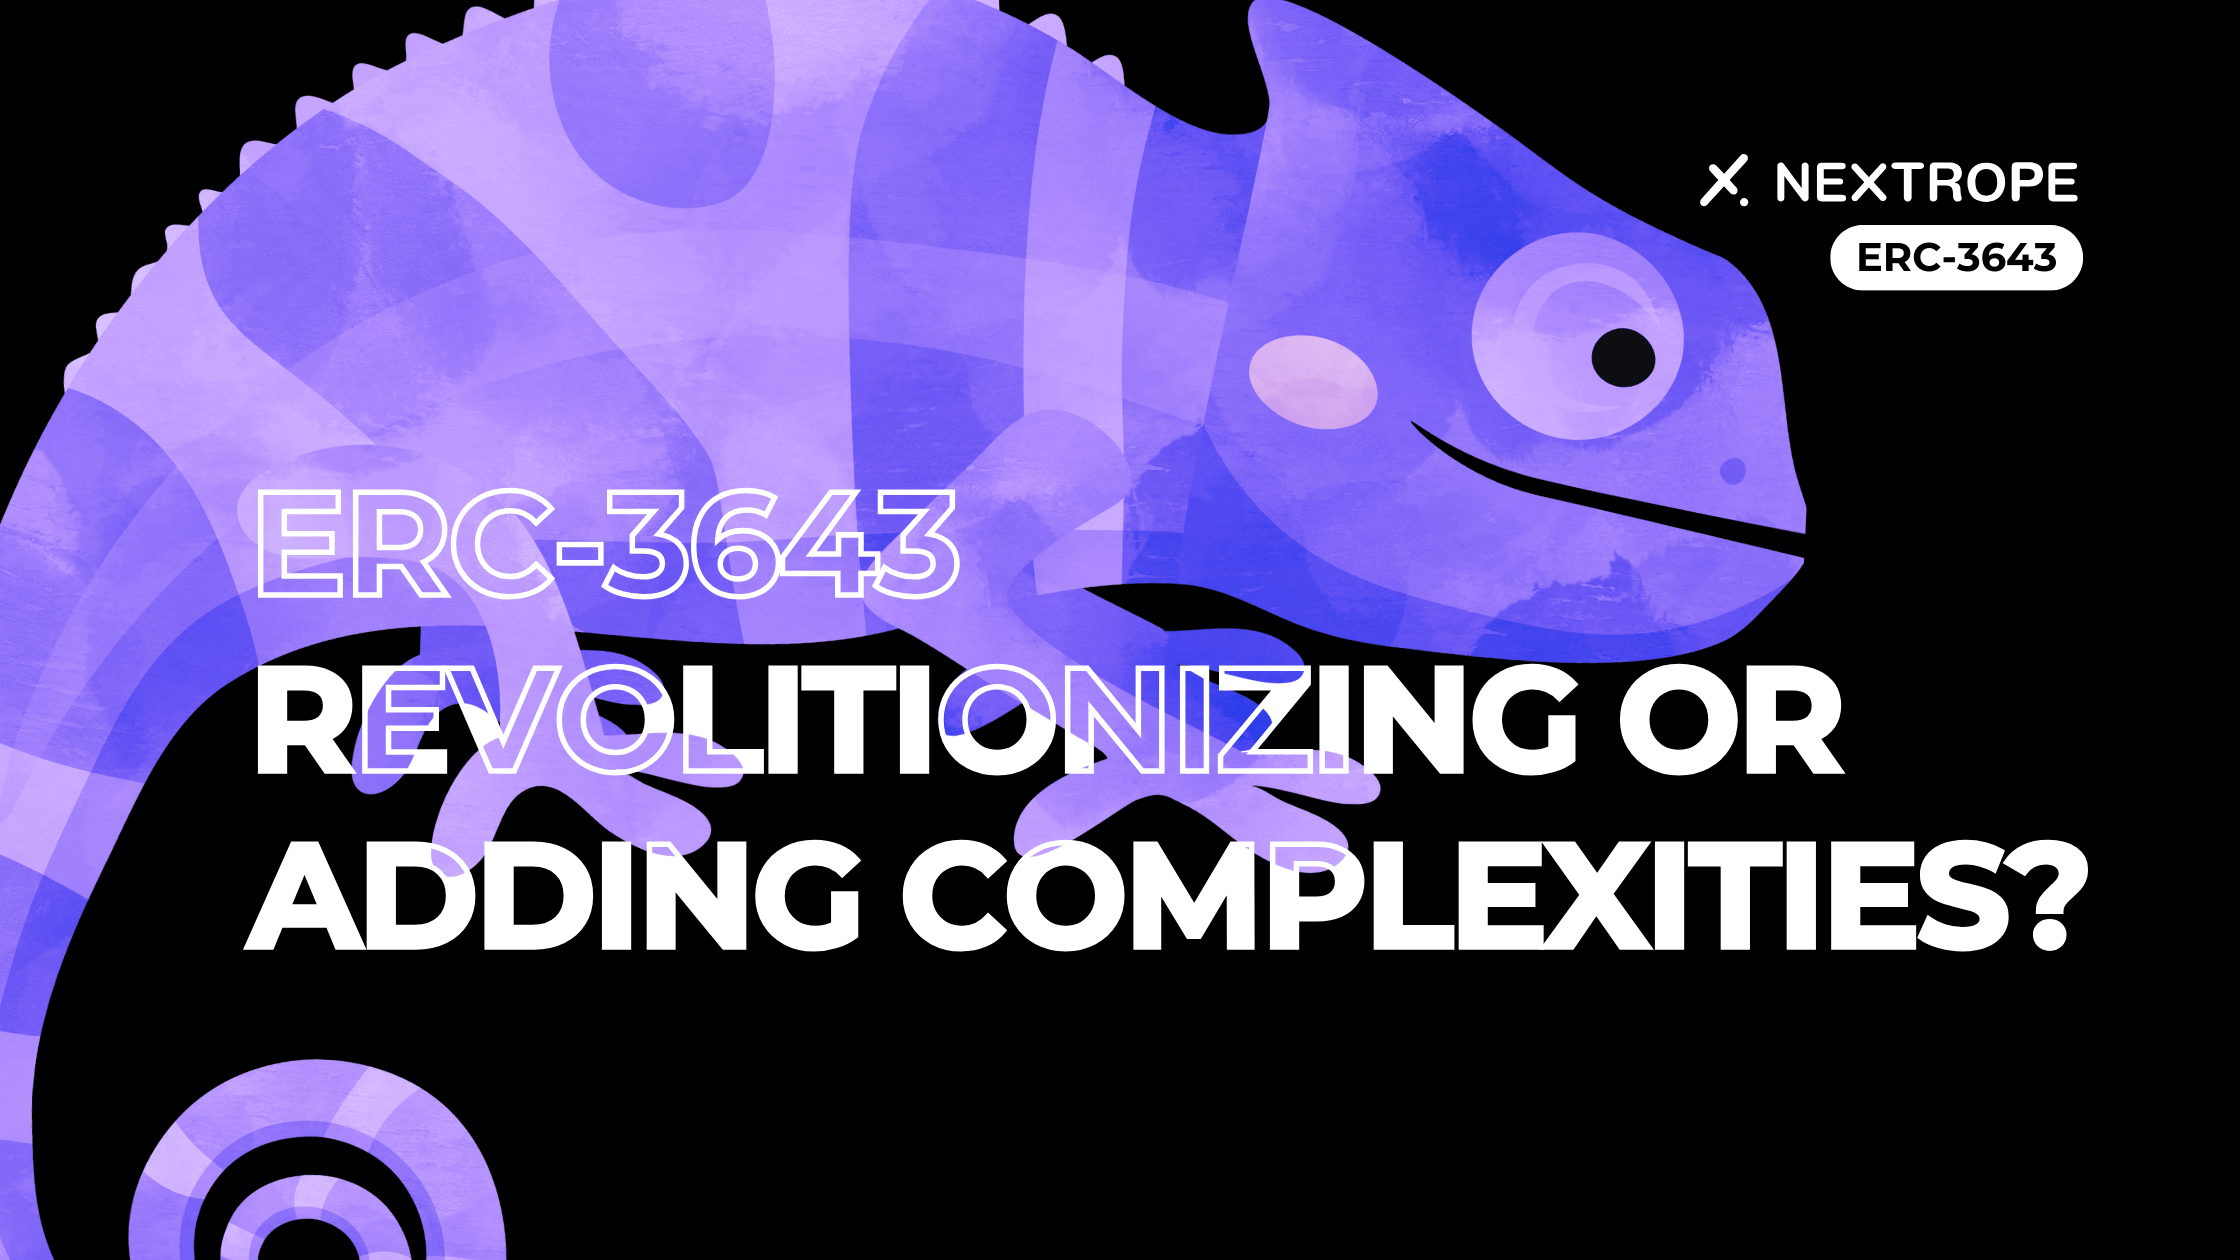 ERC-3643: Revolutionizing or Adding Complexity?